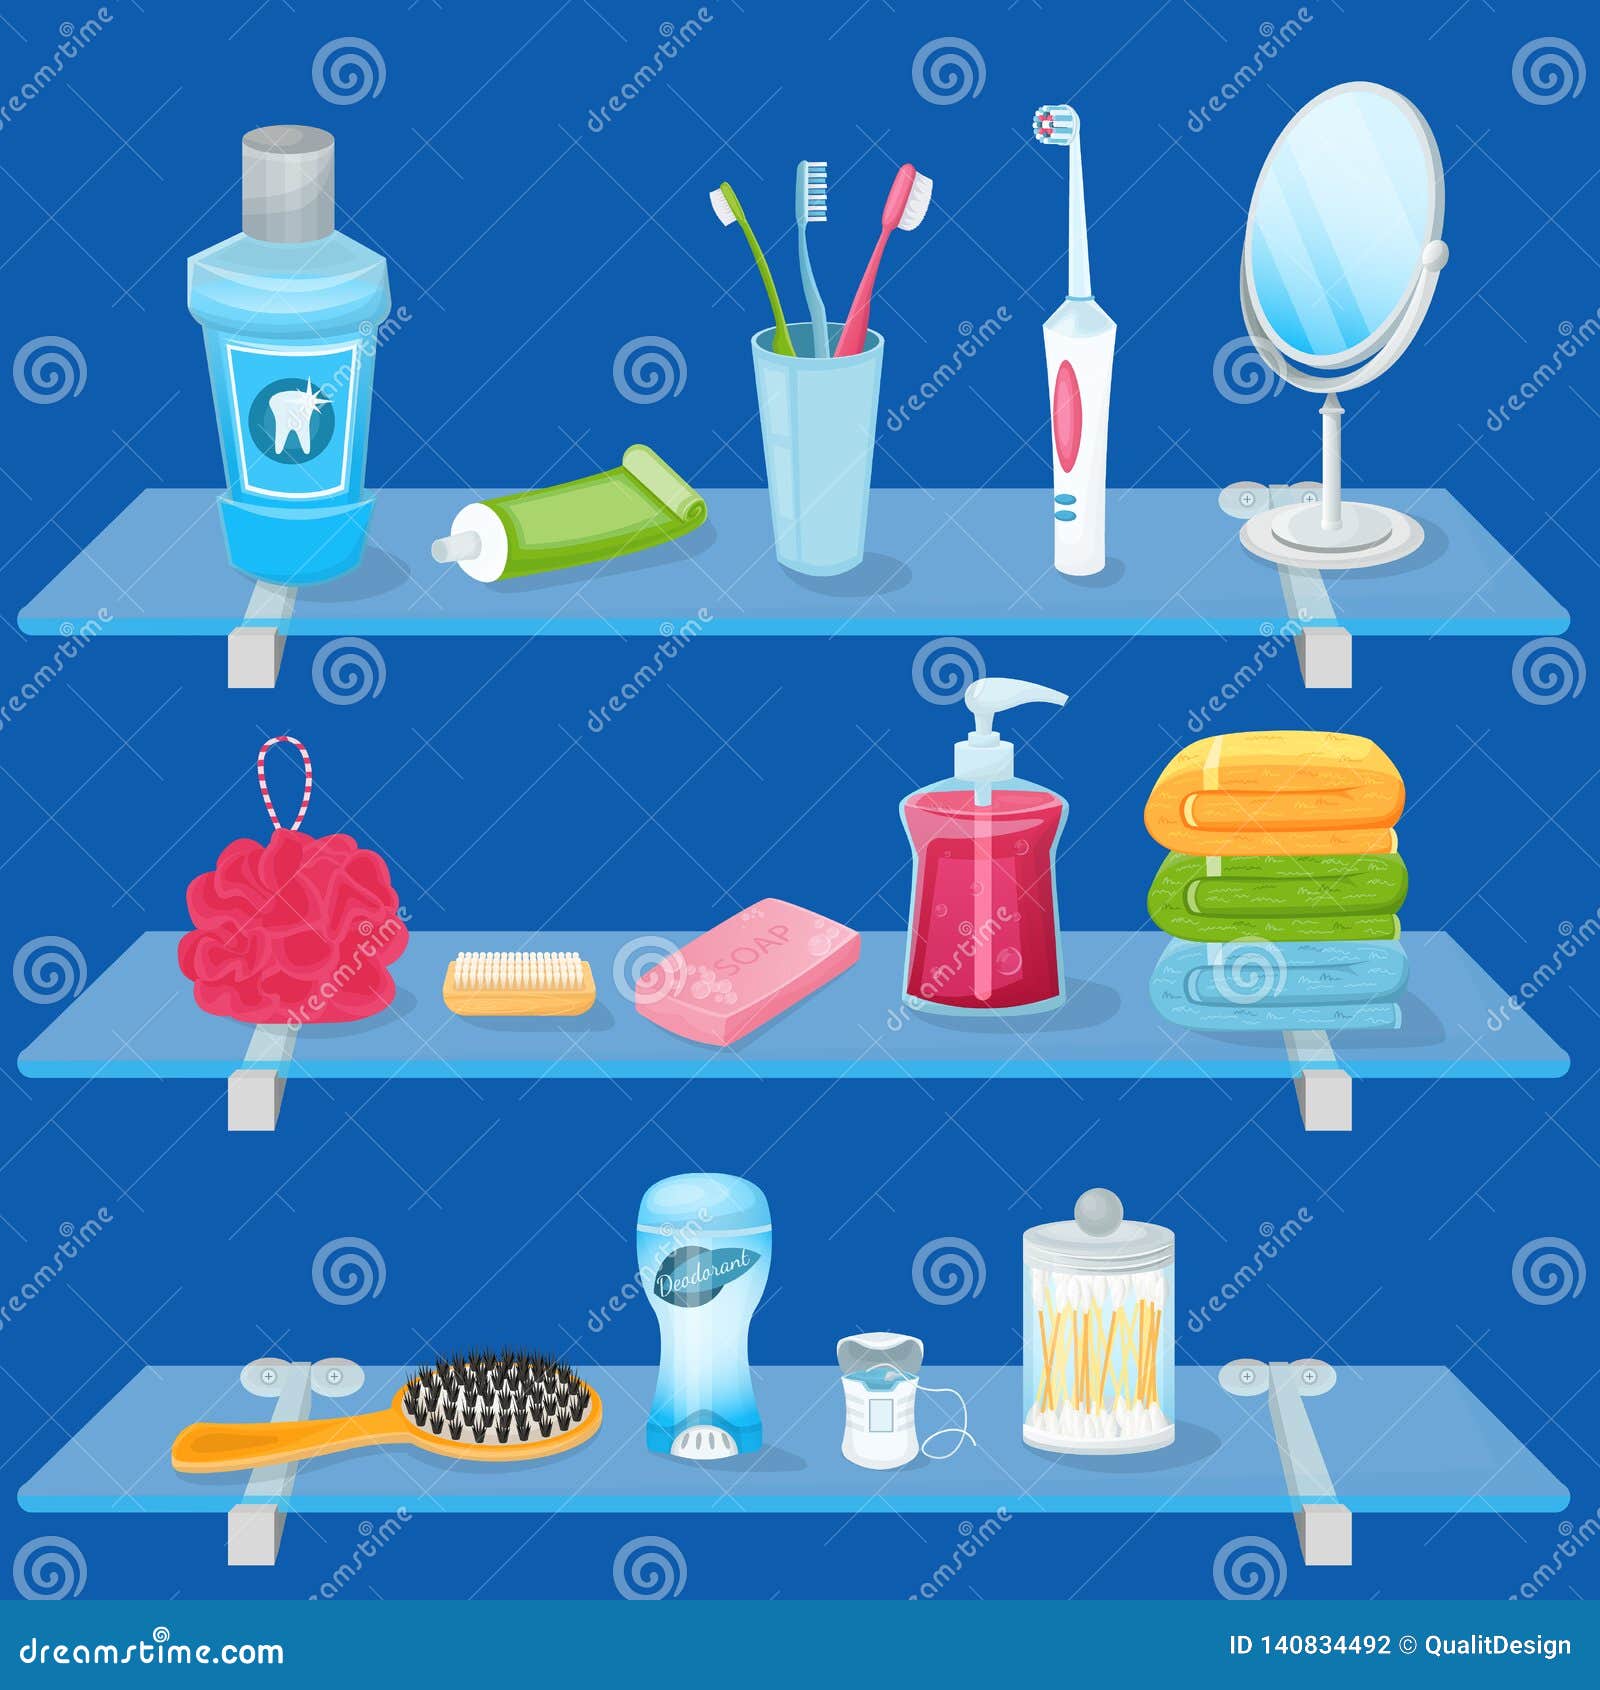 personal hygiene supplies.  . bathroom glass shelves with soap, toothbrush, toothpaste and hand towels